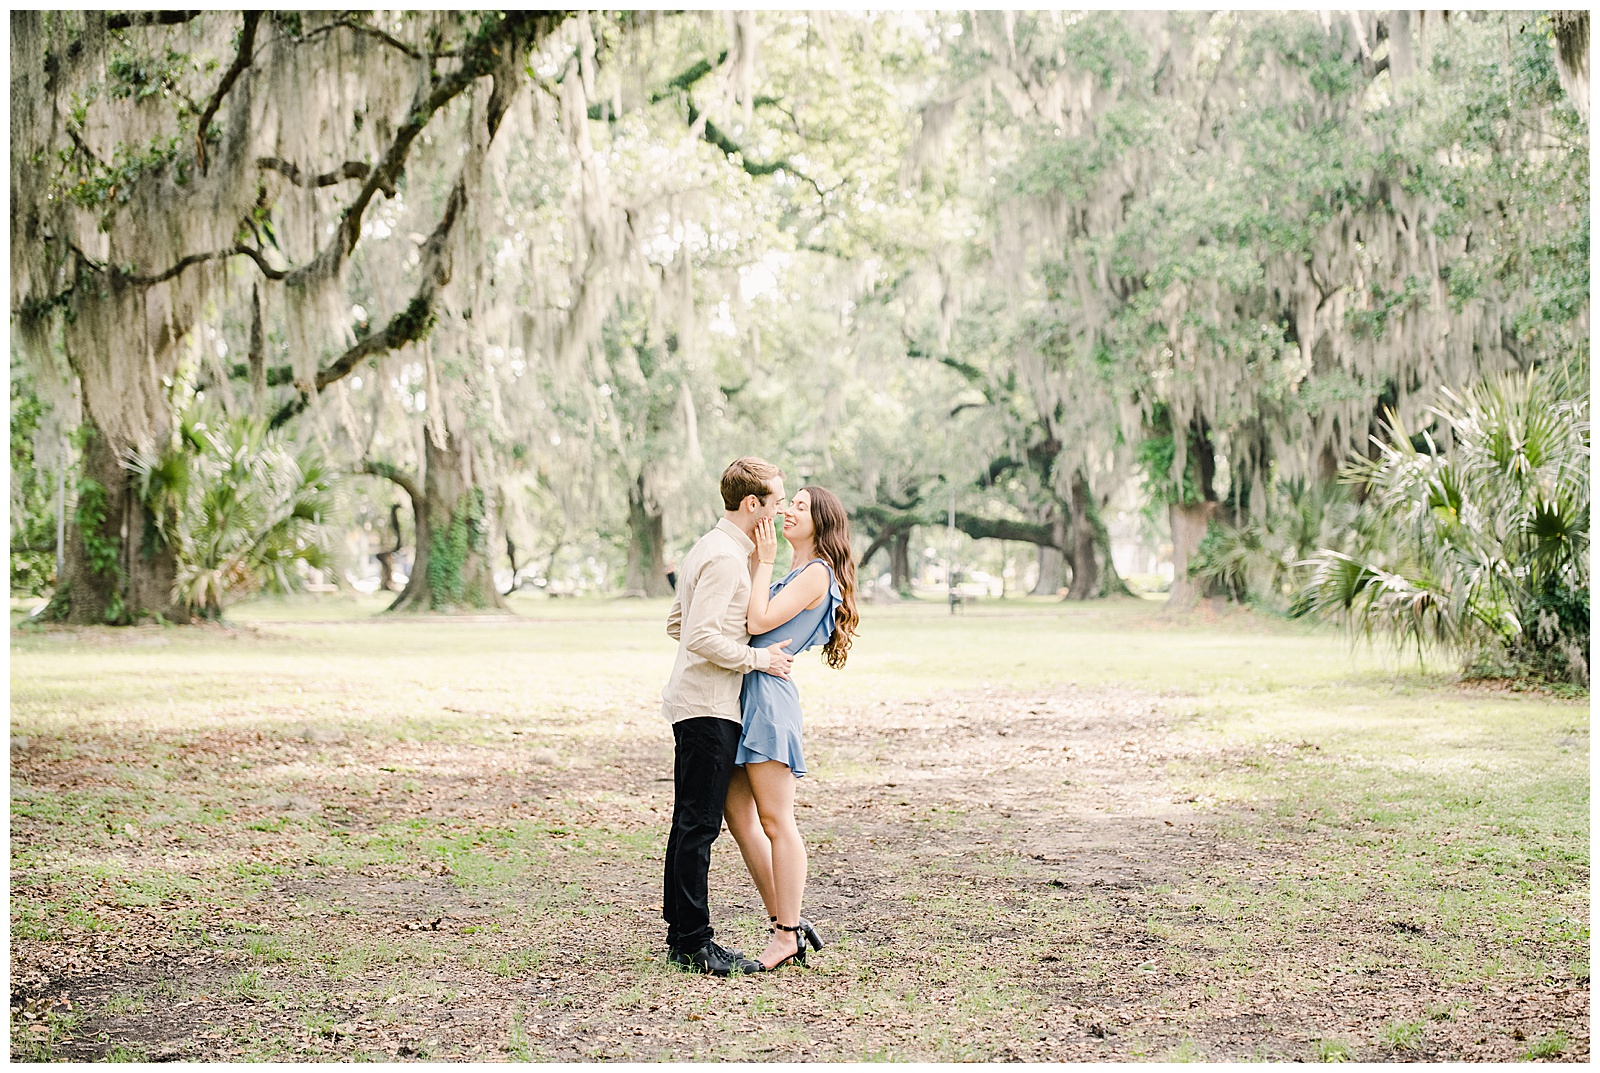 New Orleans Engagement Photos Chelsea Rousey Photography couple in love in city park laughing